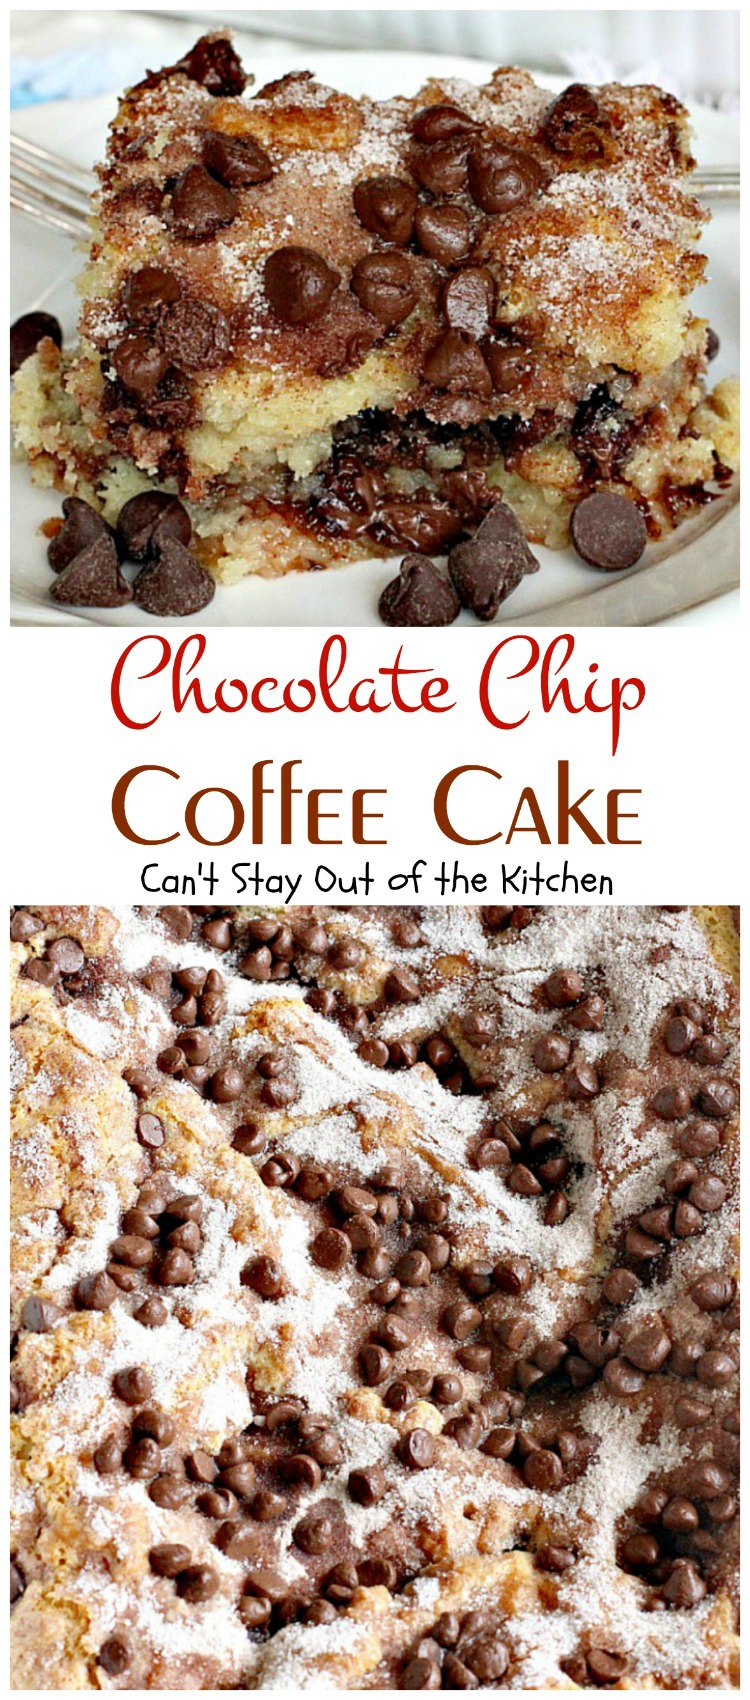 Chocolate Chip Coffee Cake | Can't Stay Out of the Kitchen